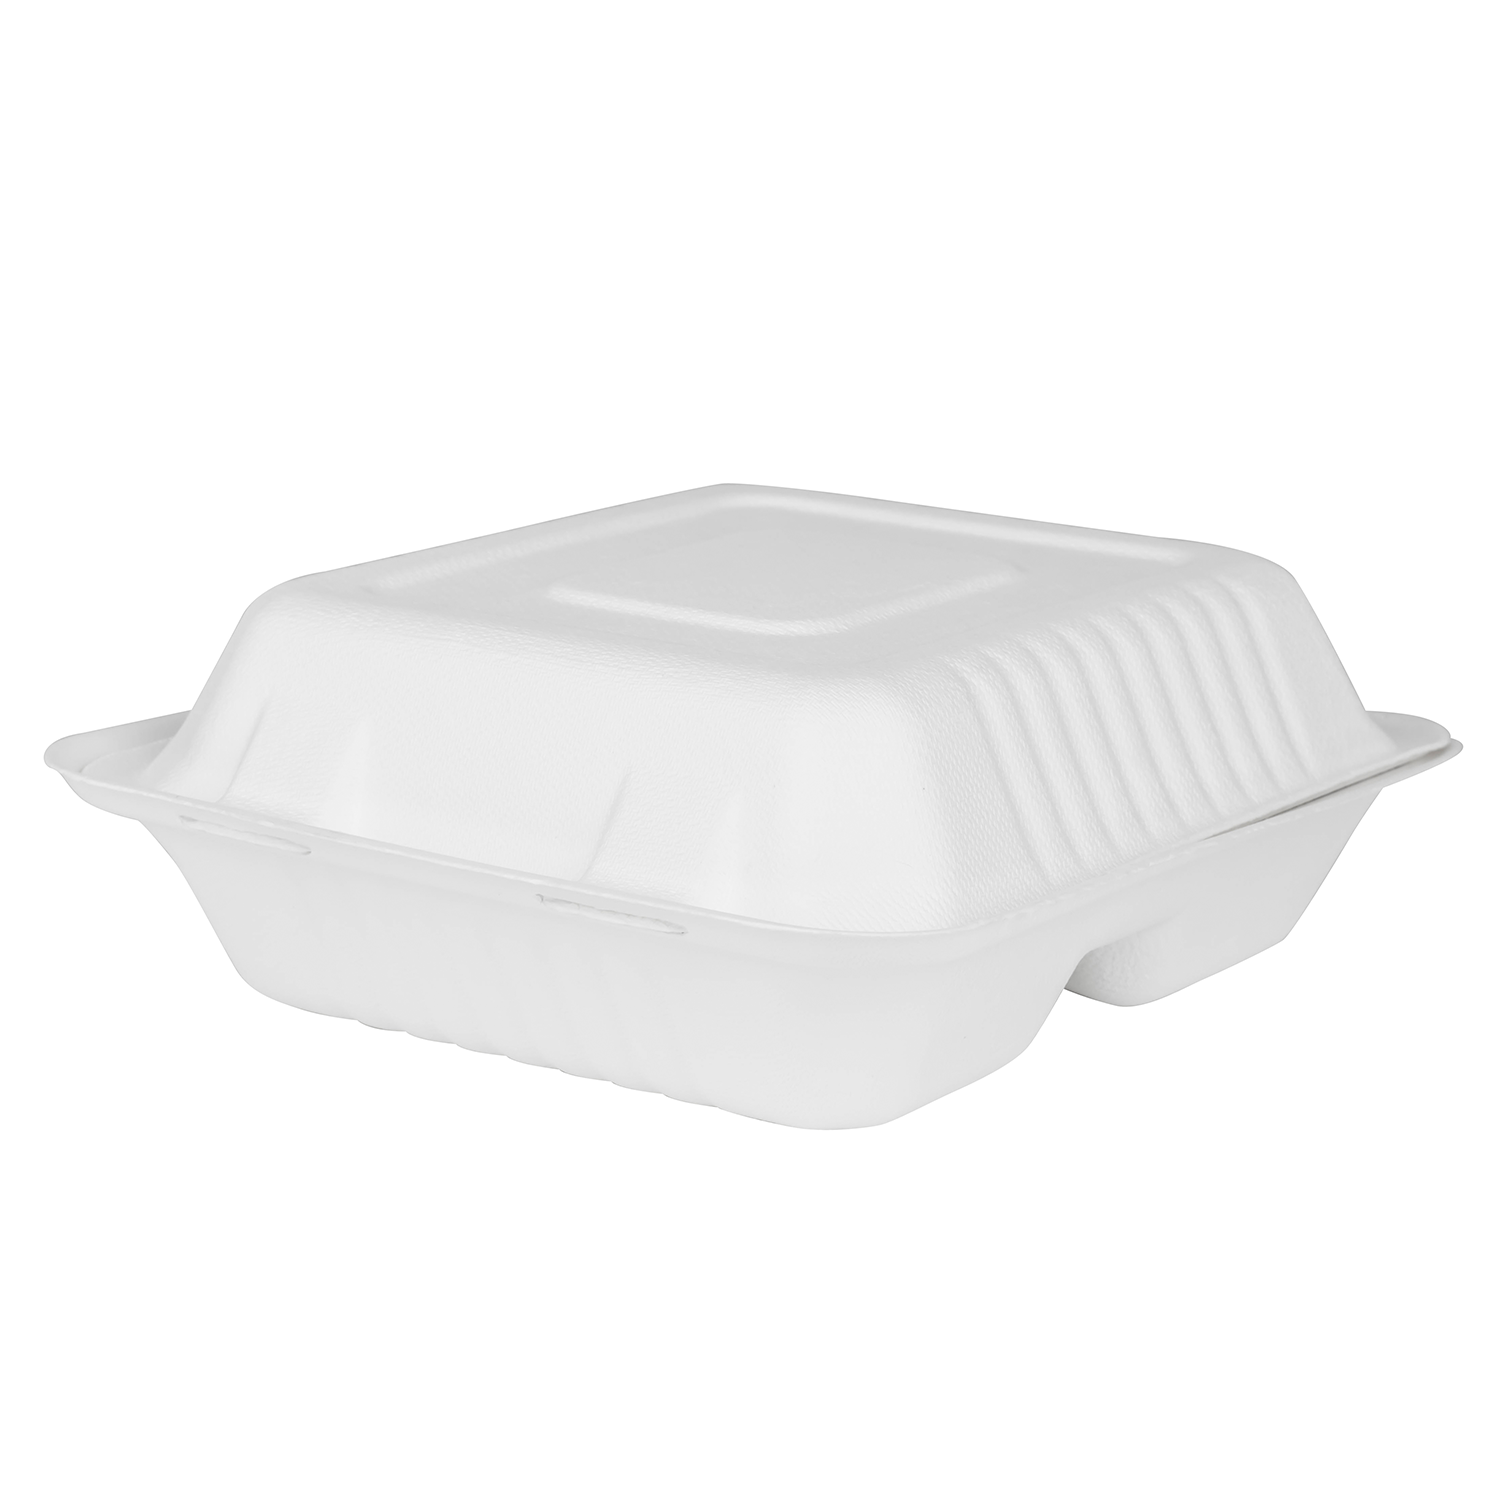 8x8.5x2.8 Eco-Friendly Disposable Takeout Box - Single Compartment